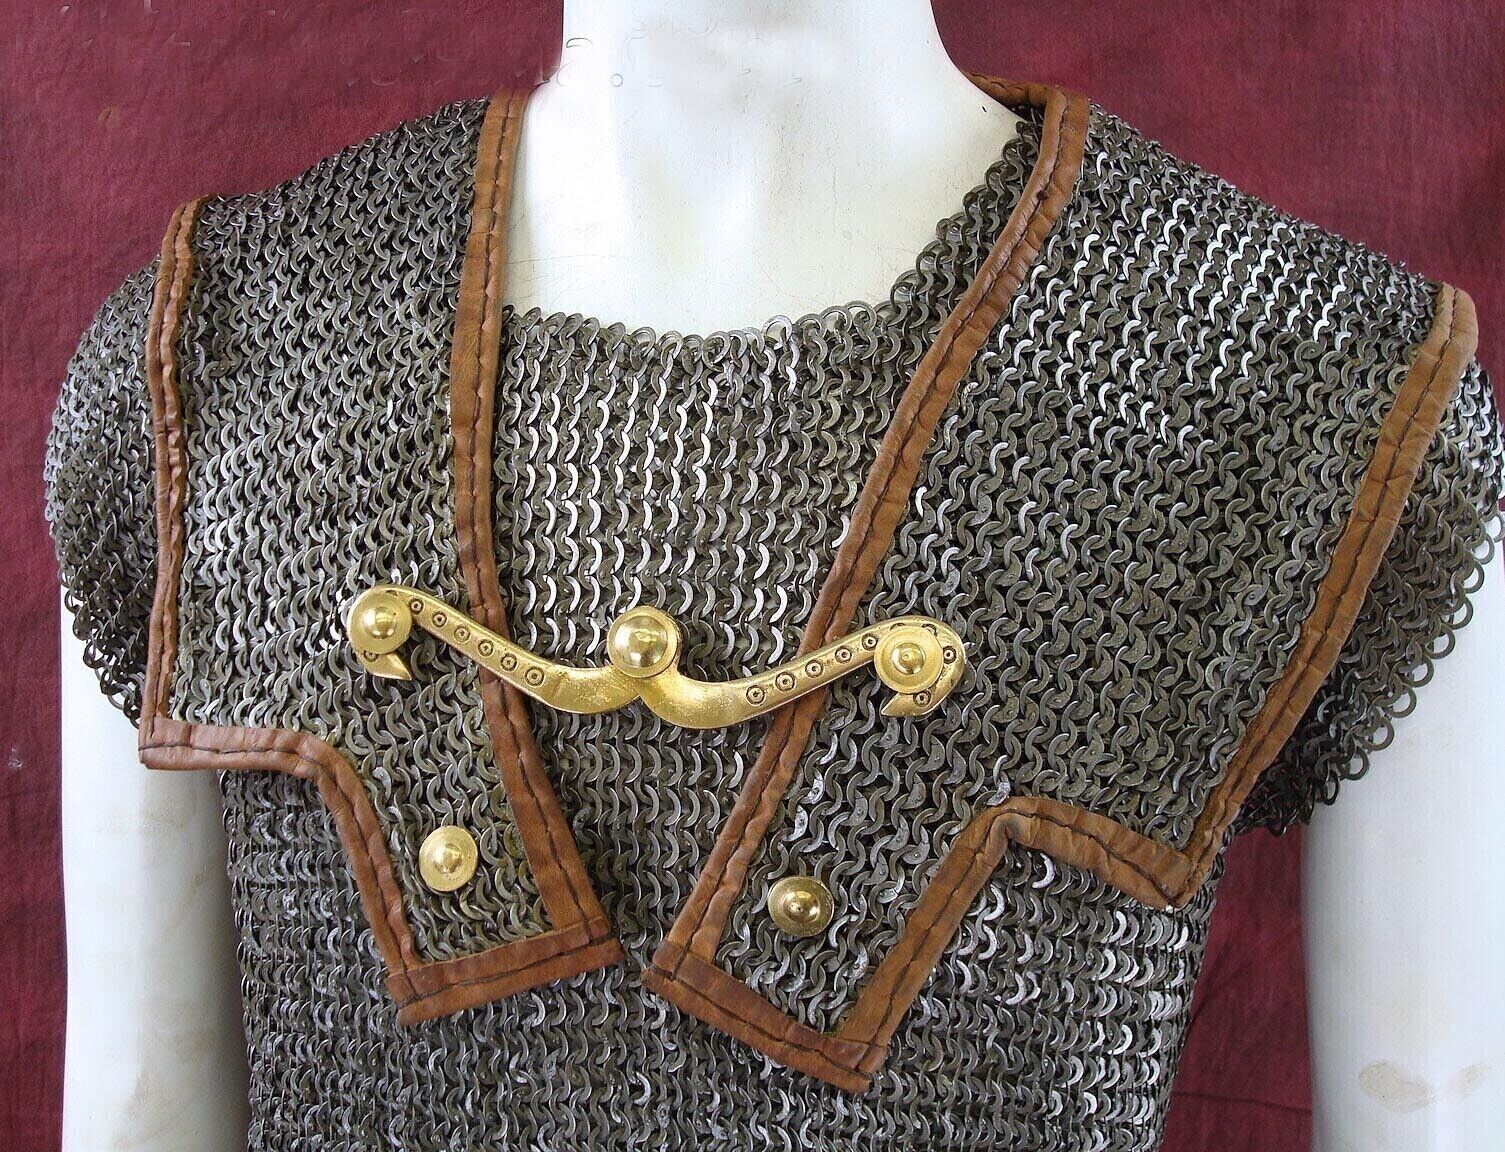 Lorica Hamata Medieval Chainmail Shirt 6 mm Riveted  Chainmail Armor Reenactment